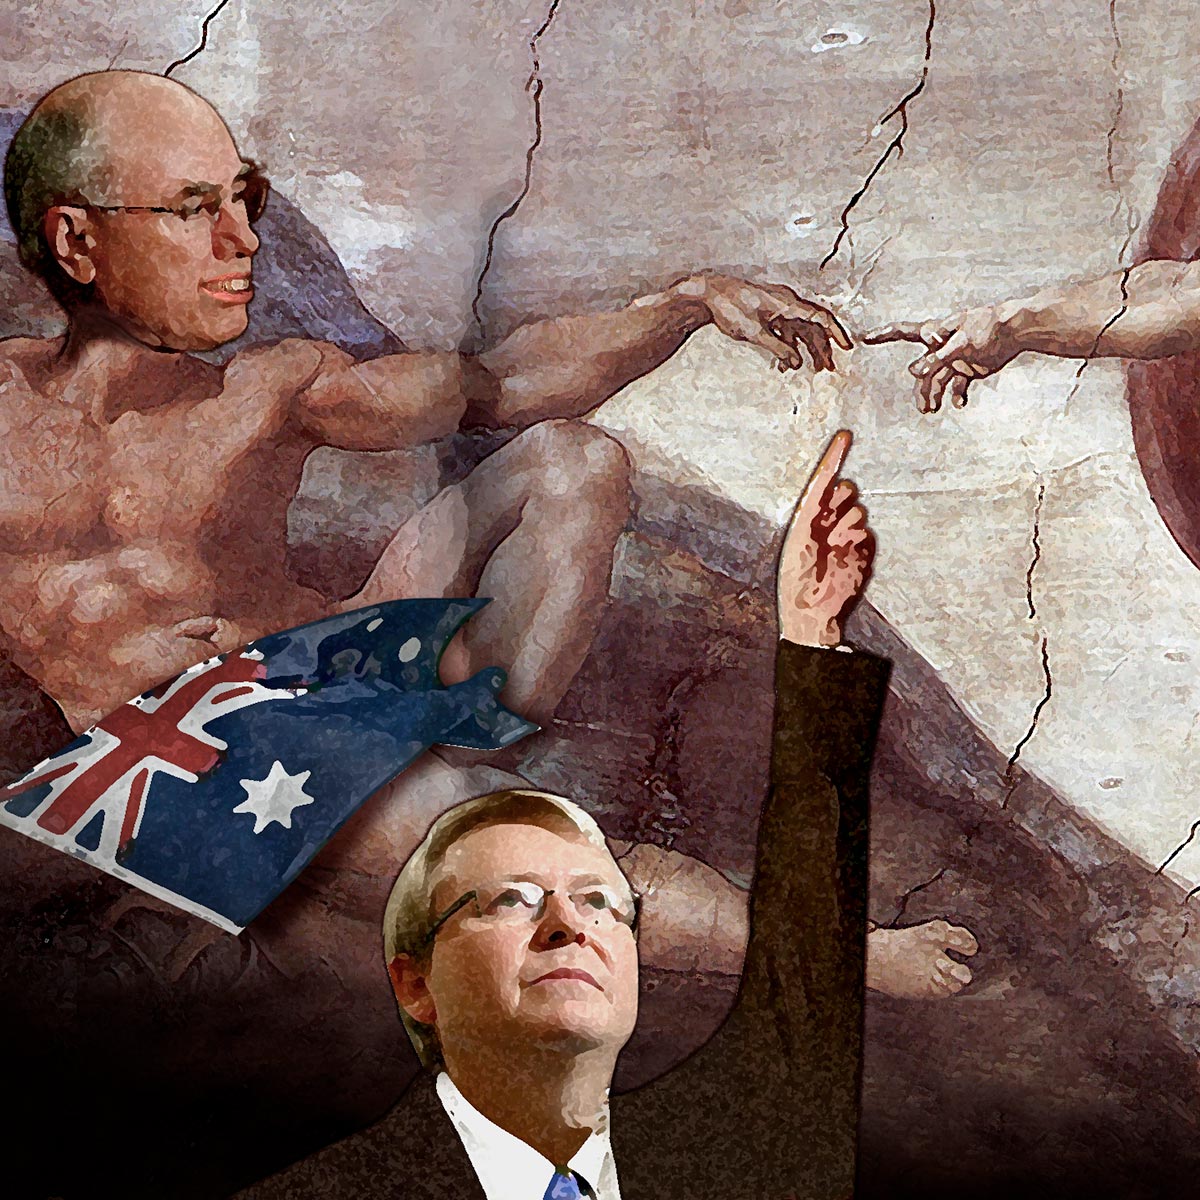 Political cartoon of featuring a colour illustration parodying Michelangelo's 'Creation of Adam'. John Howard's head has been painted on top of Adam's naked reclining form. An Australian flag is draped over his nether regions. Kevin Rudd is in the centre front, wearing a suit and tie. His left arm is raised and pointing towards the convergence of Howard and God's fingers. - click to view larger image